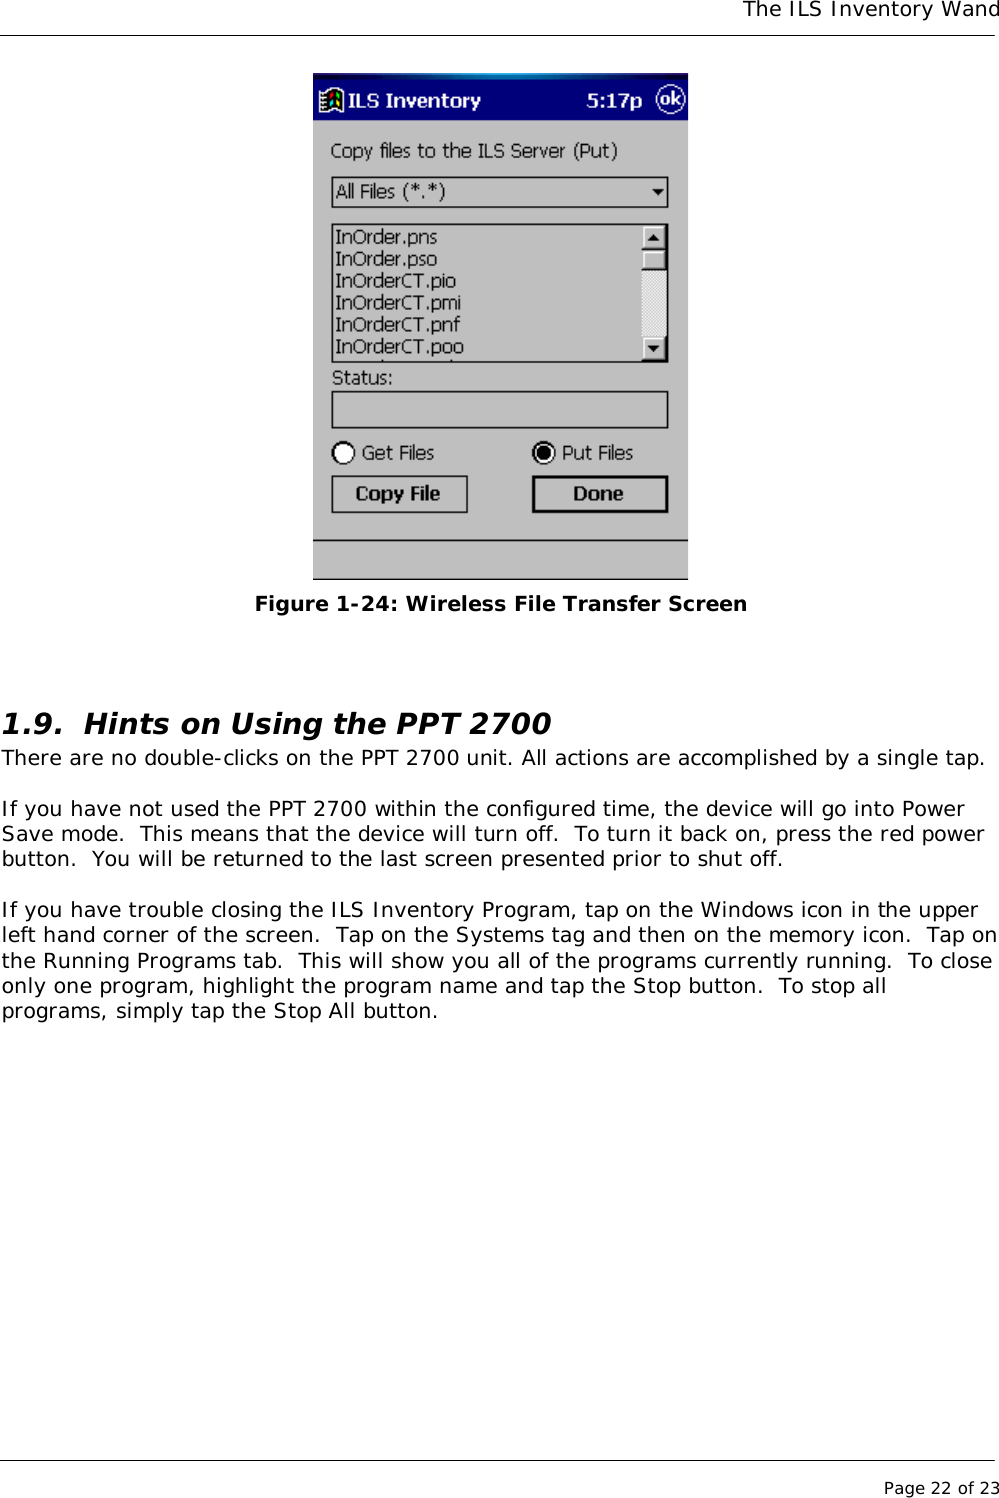 The ILS Inventory WandPage 22 of 23Figure 1-24: Wireless File Transfer Screen1.9. Hints on Using the PPT 2700There are no double-clicks on the PPT 2700 unit. All actions are accomplished by a single tap.If you have not used the PPT 2700 within the configured time, the device will go into PowerSave mode.  This means that the device will turn off.  To turn it back on, press the red powerbutton.  You will be returned to the last screen presented prior to shut off.If you have trouble closing the ILS Inventory Program, tap on the Windows icon in the upperleft hand corner of the screen.  Tap on the Systems tag and then on the memory icon.  Tap onthe Running Programs tab.  This will show you all of the programs currently running.  To closeonly one program, highlight the program name and tap the Stop button.  To stop allprograms, simply tap the Stop All button.